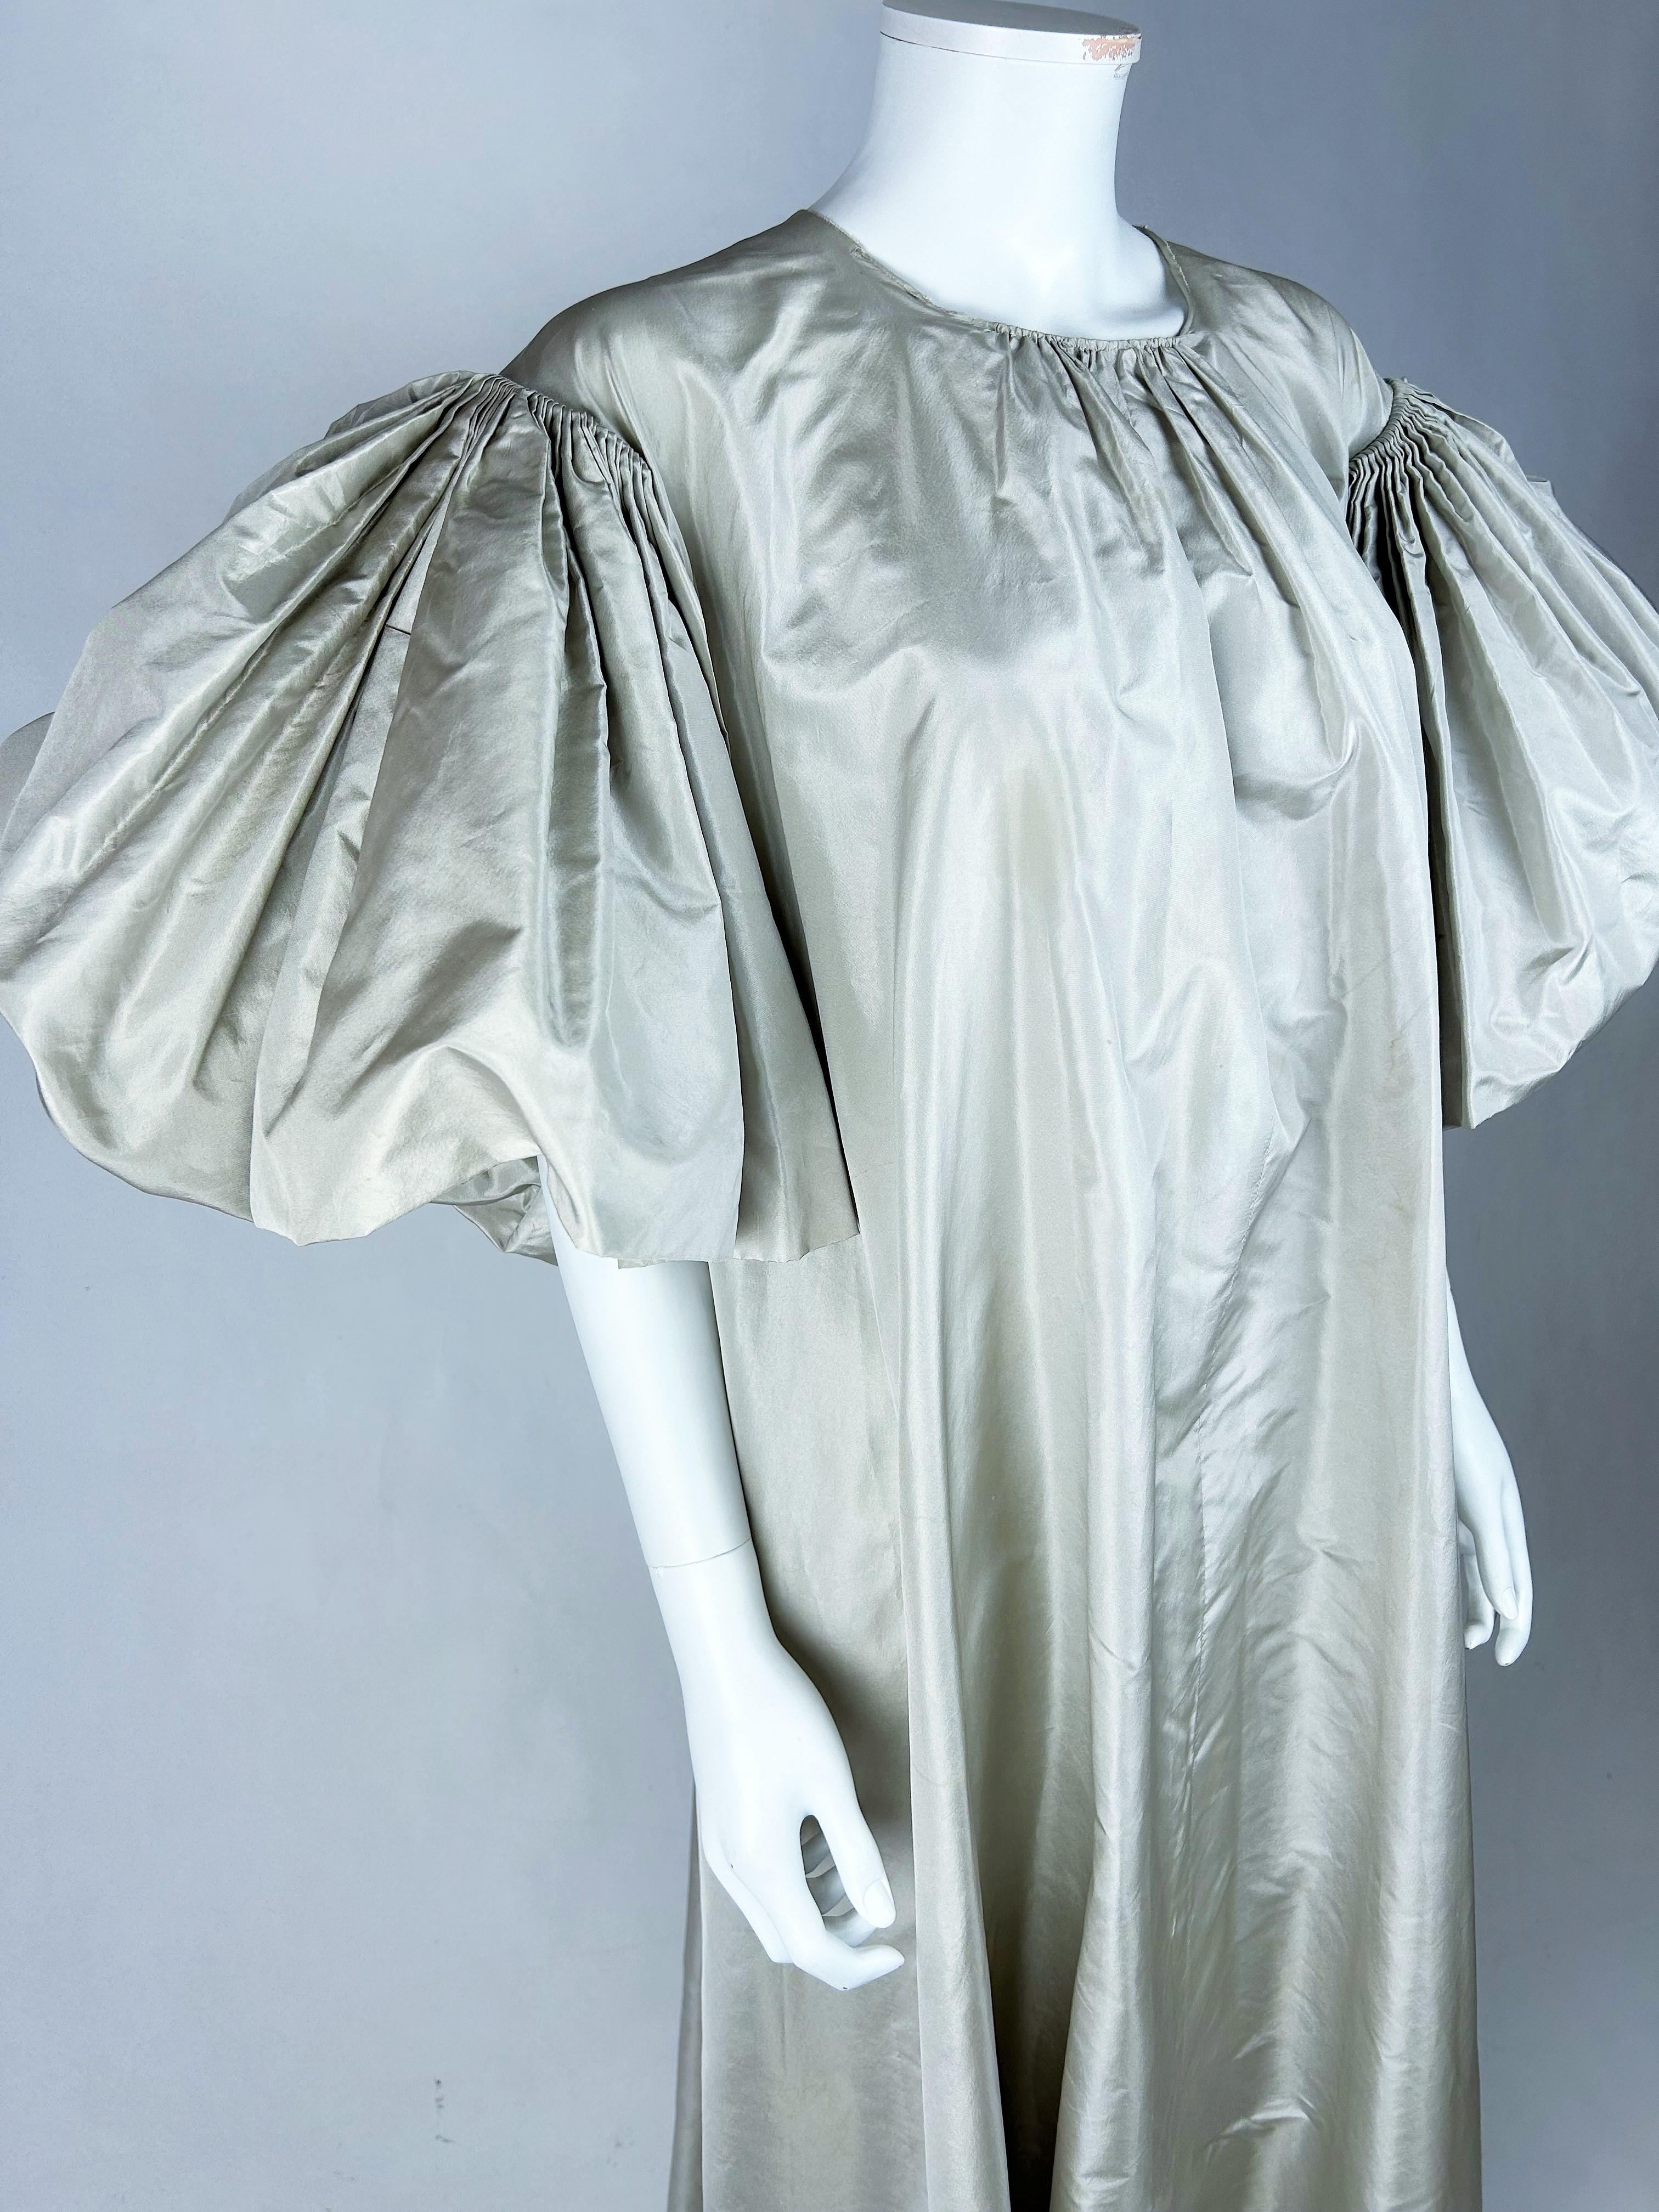 Autumn-Winter 1977 Collection

France

Dramatic long evening gown in pearl grey silk taffeta, in the form of a toga by Madame Grès Haute Couture (attributed to). Chasuble cut with very large bottom, crew neck slightly gathered in the middle, zipper